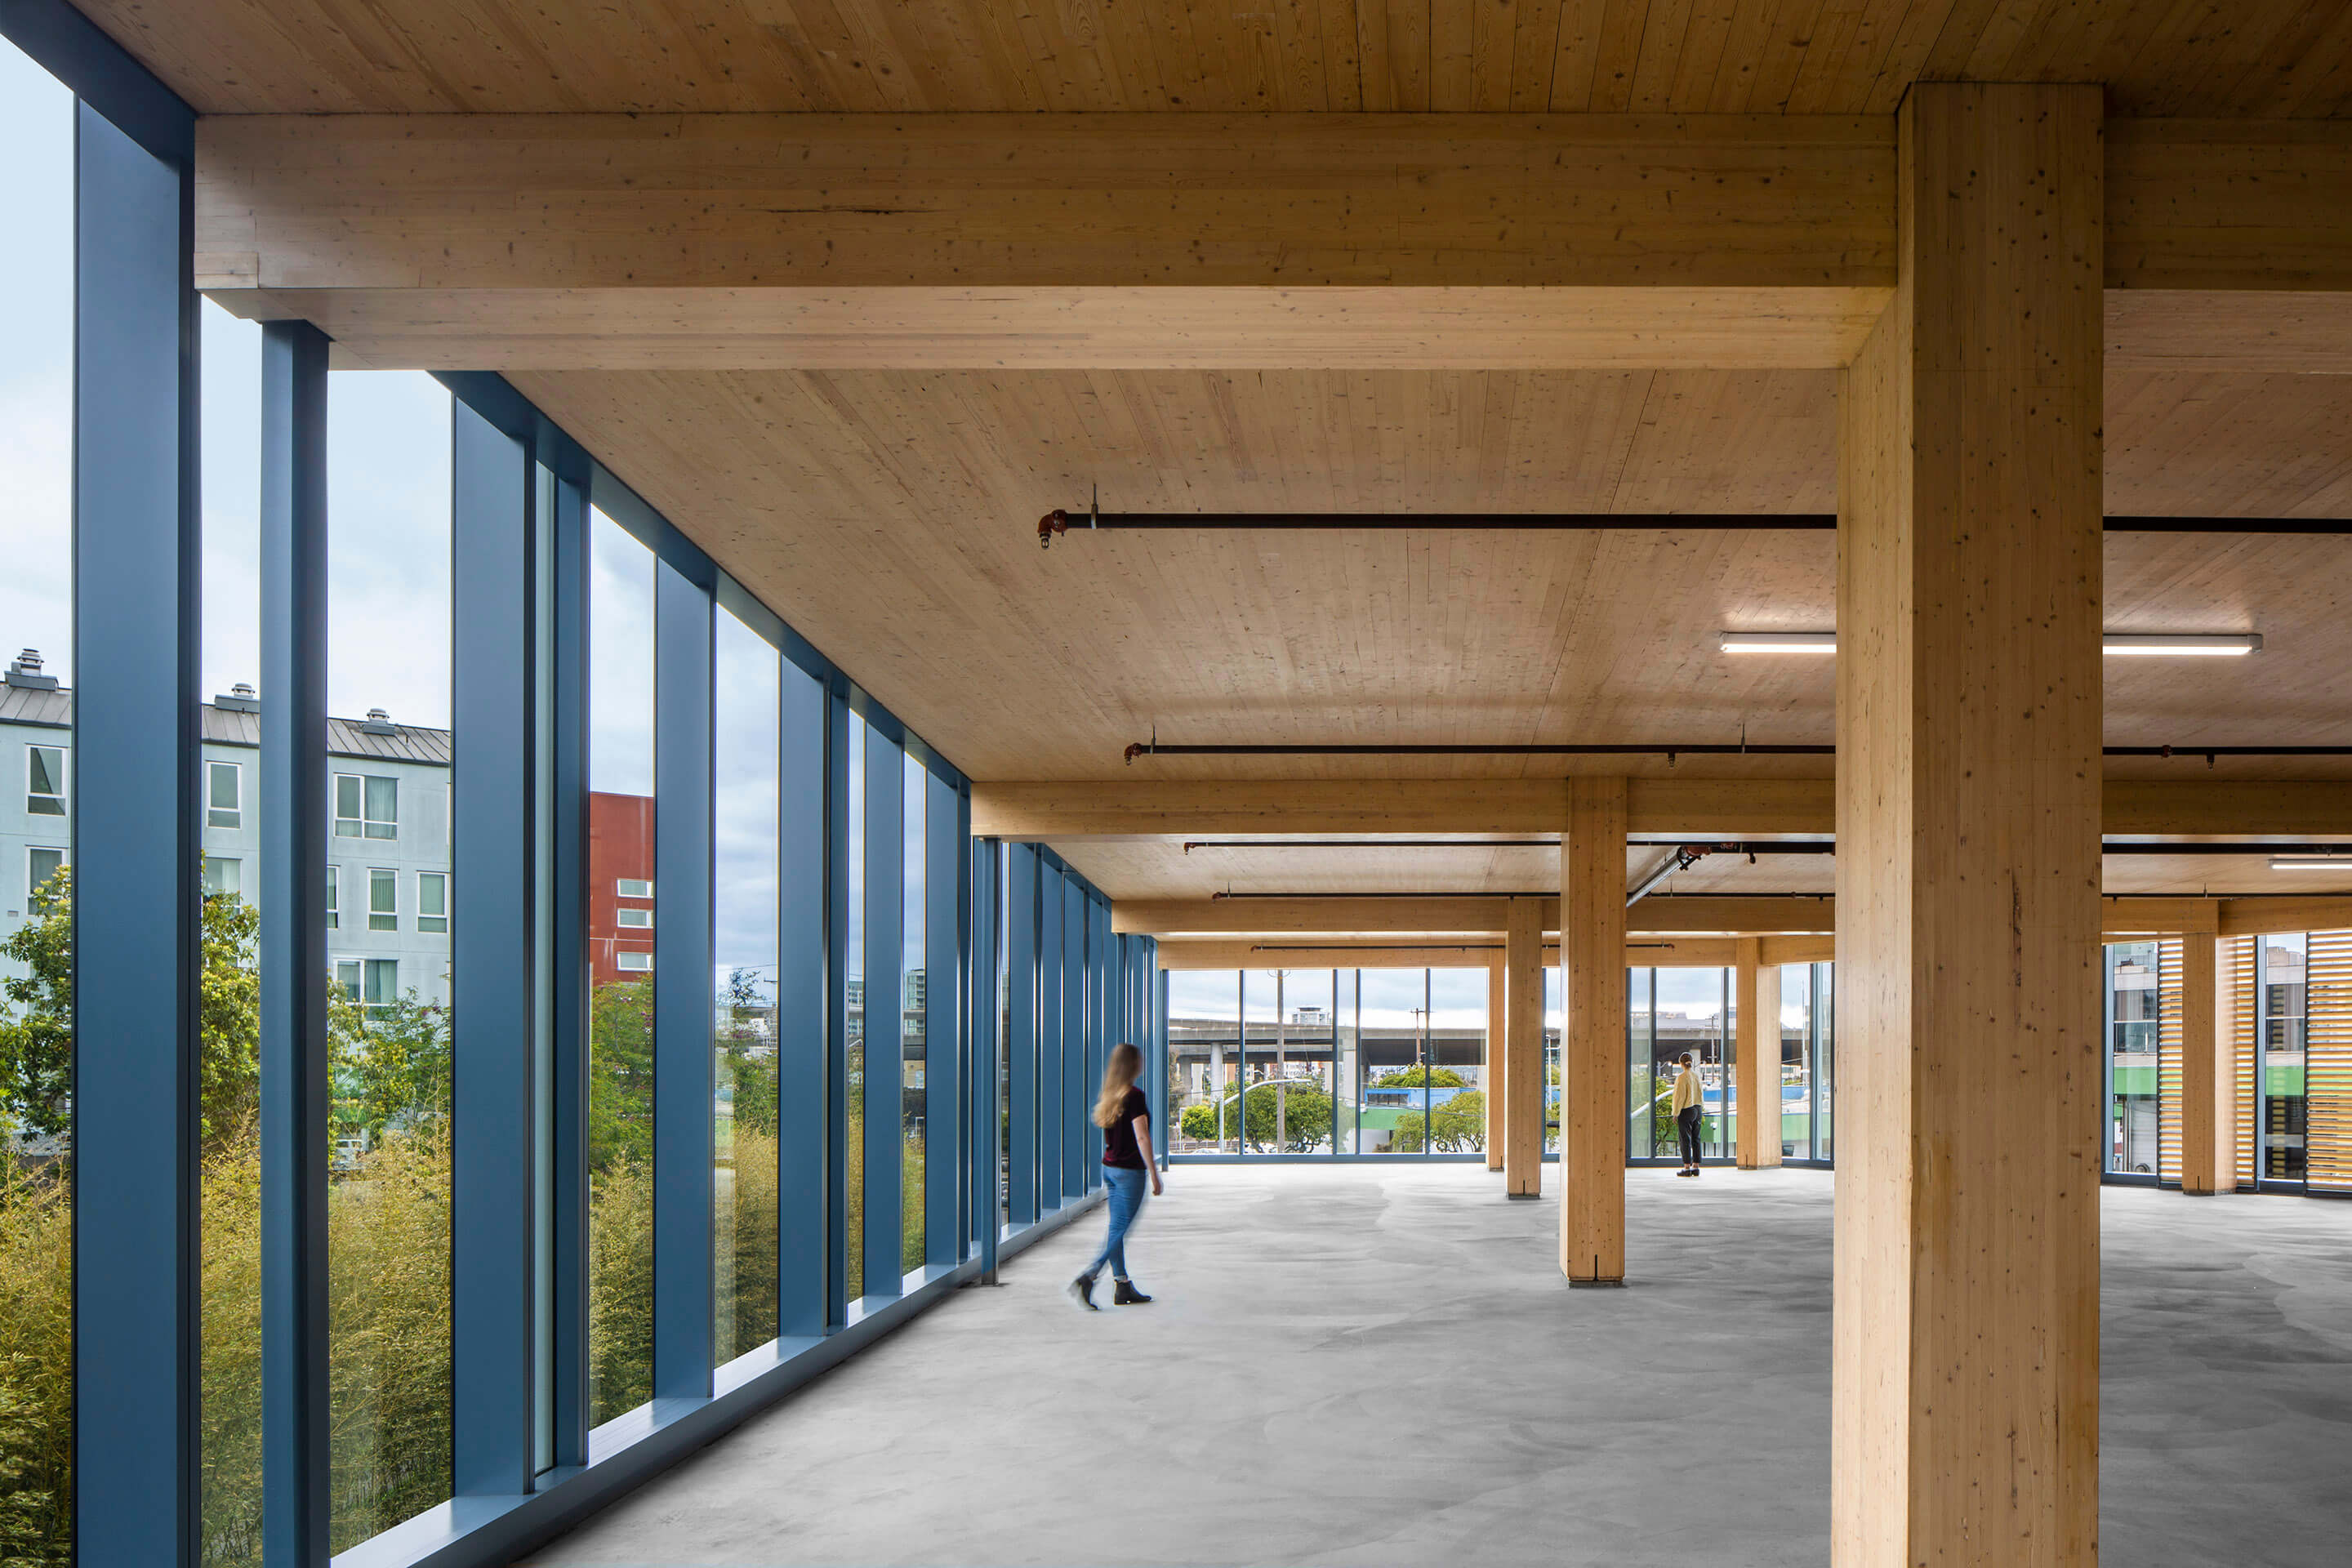 a sprawling open space with large windows and wood panel ceiling